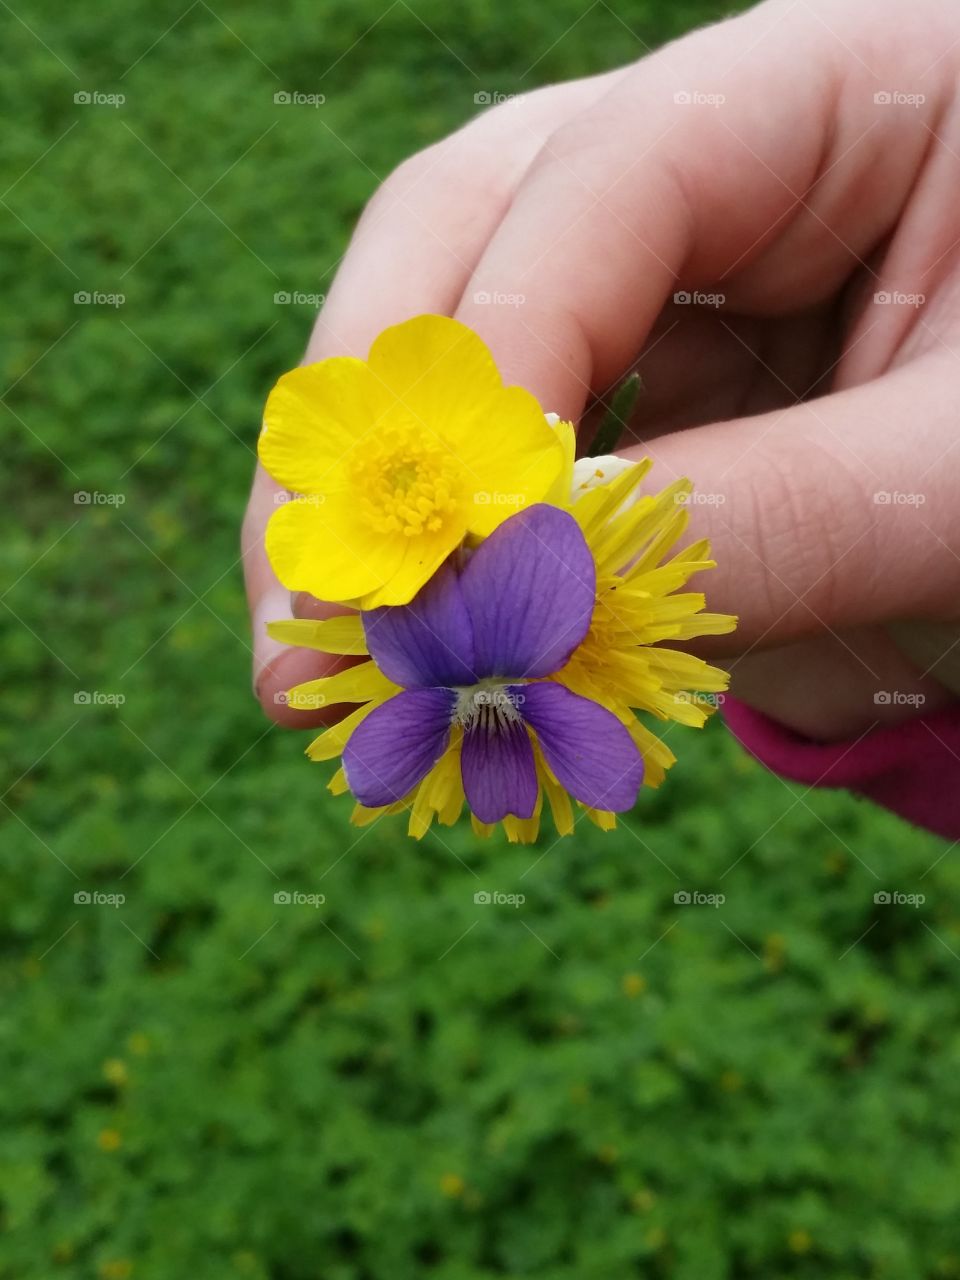 Picking Springtime Wildflowers at the park. Tiny bouquet 